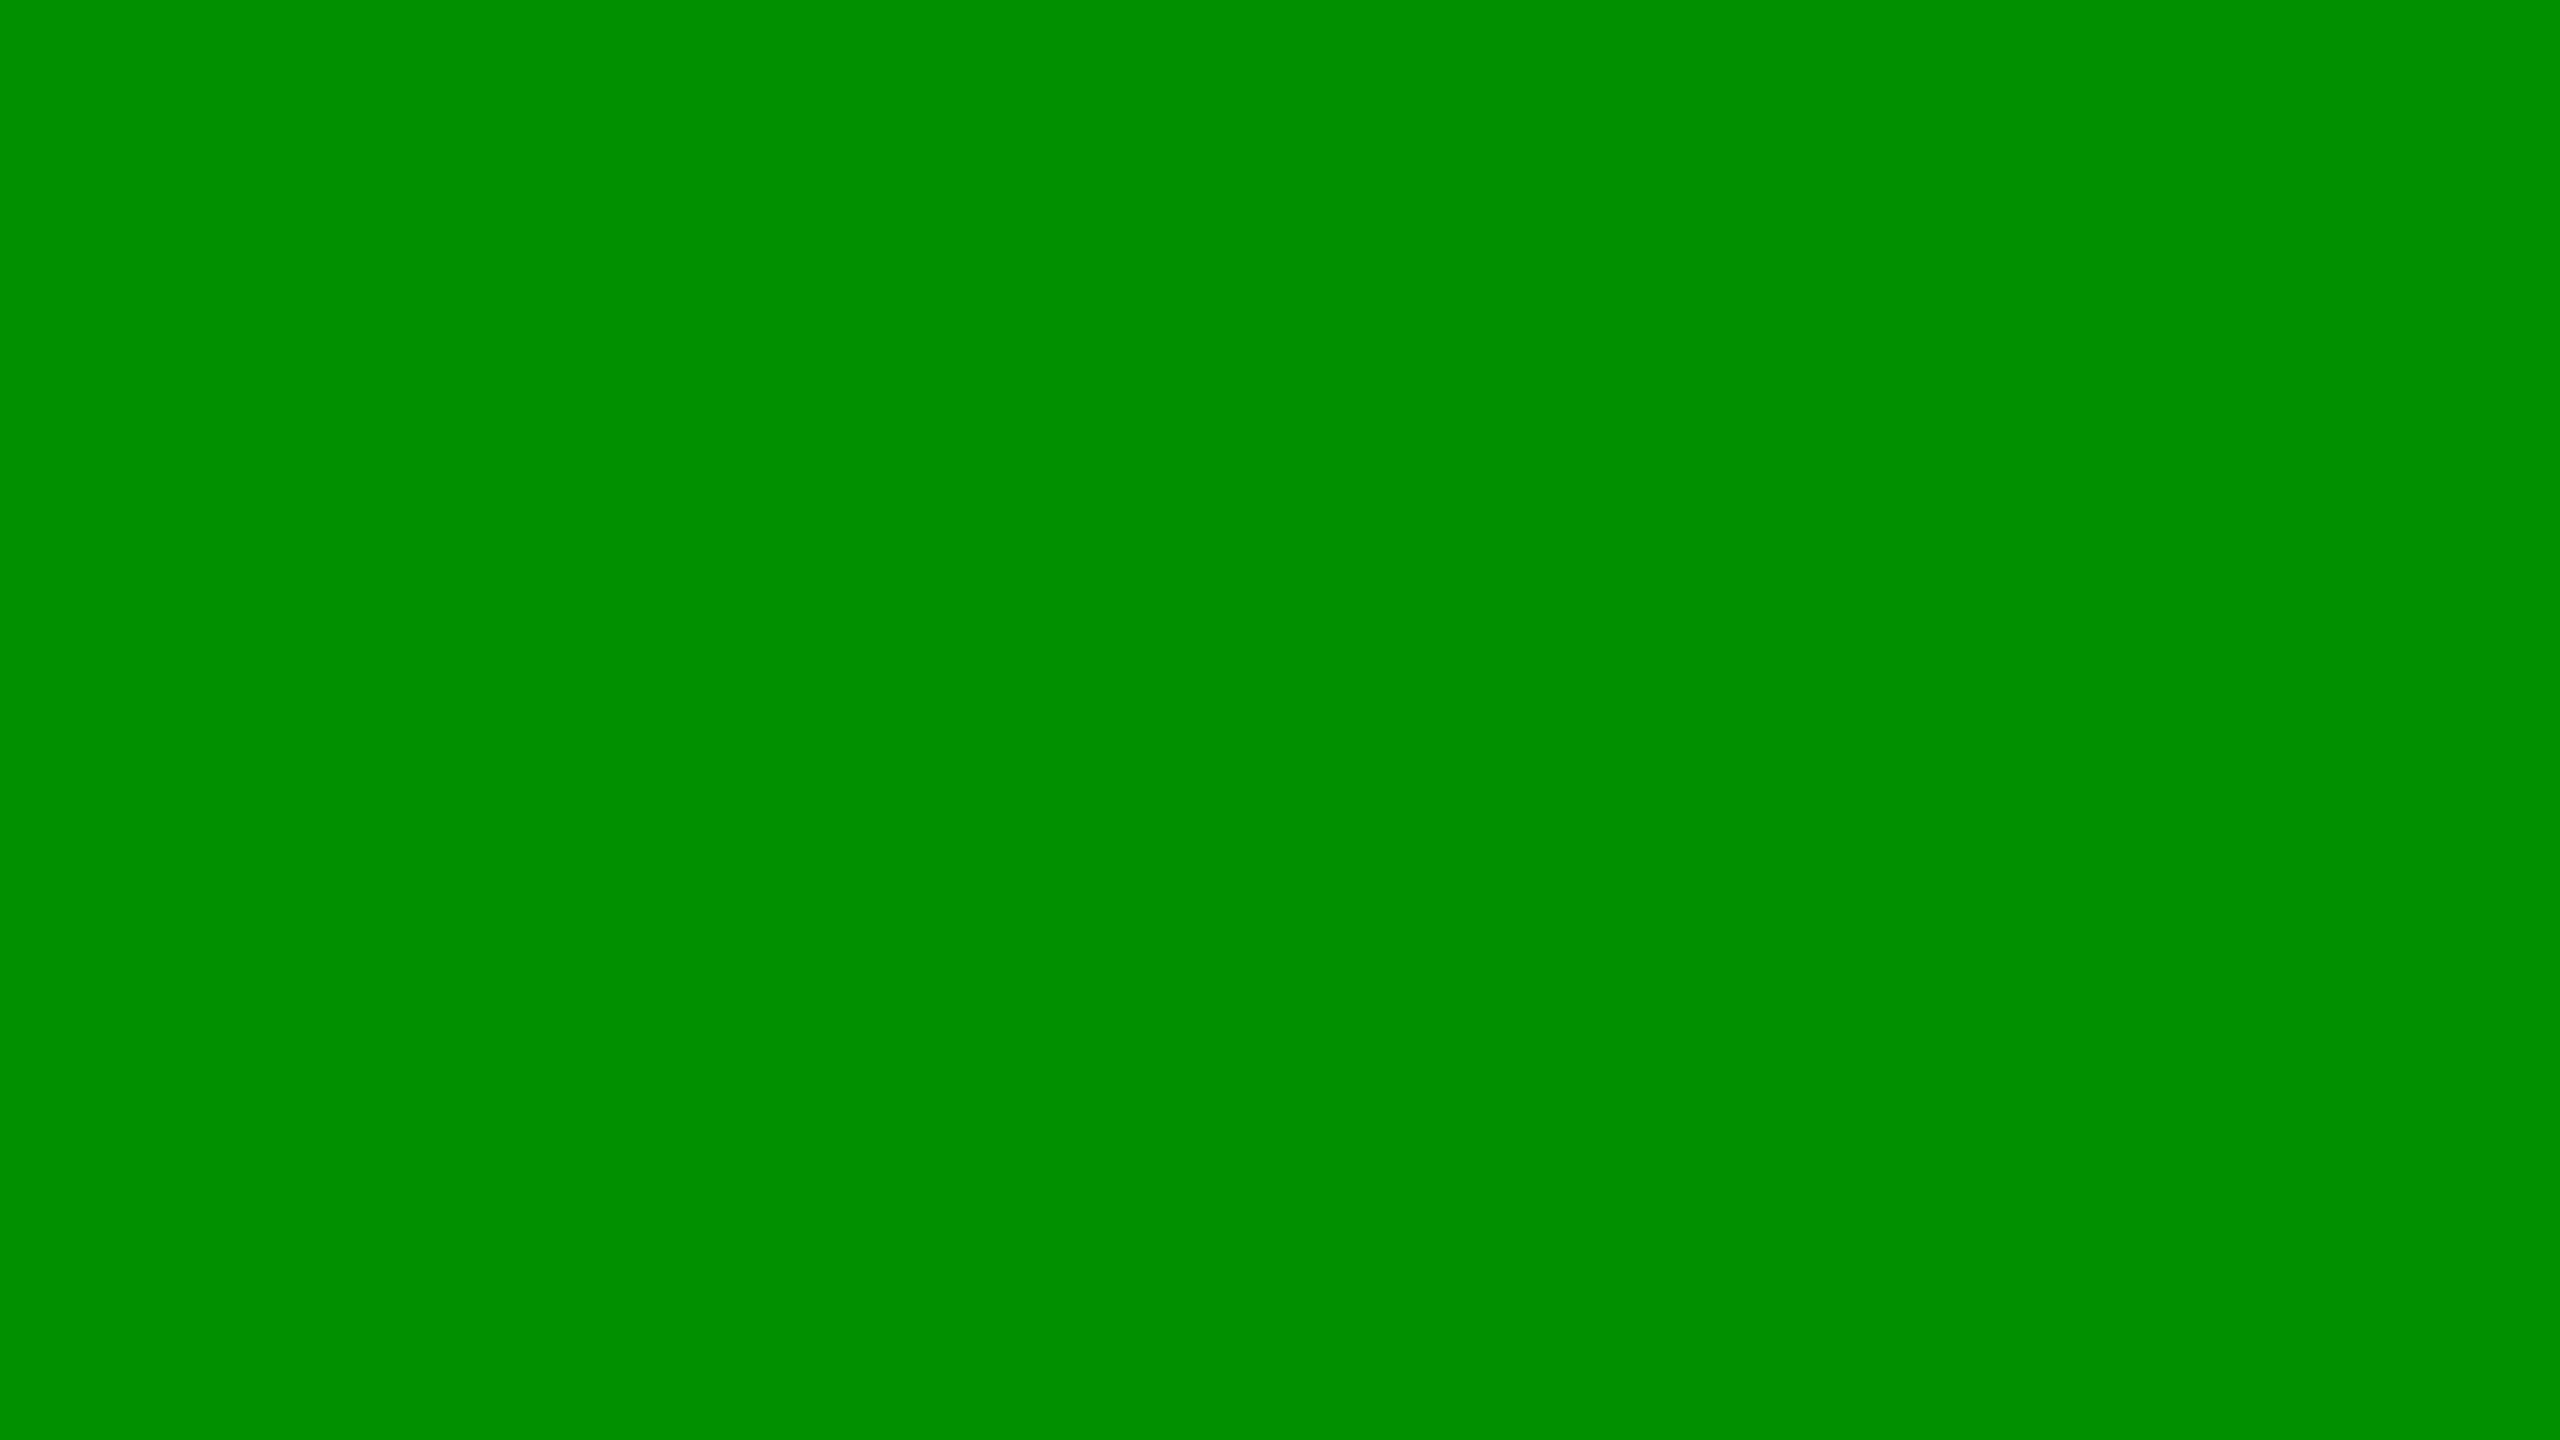 Gallery For Gt Solid Green Color Background